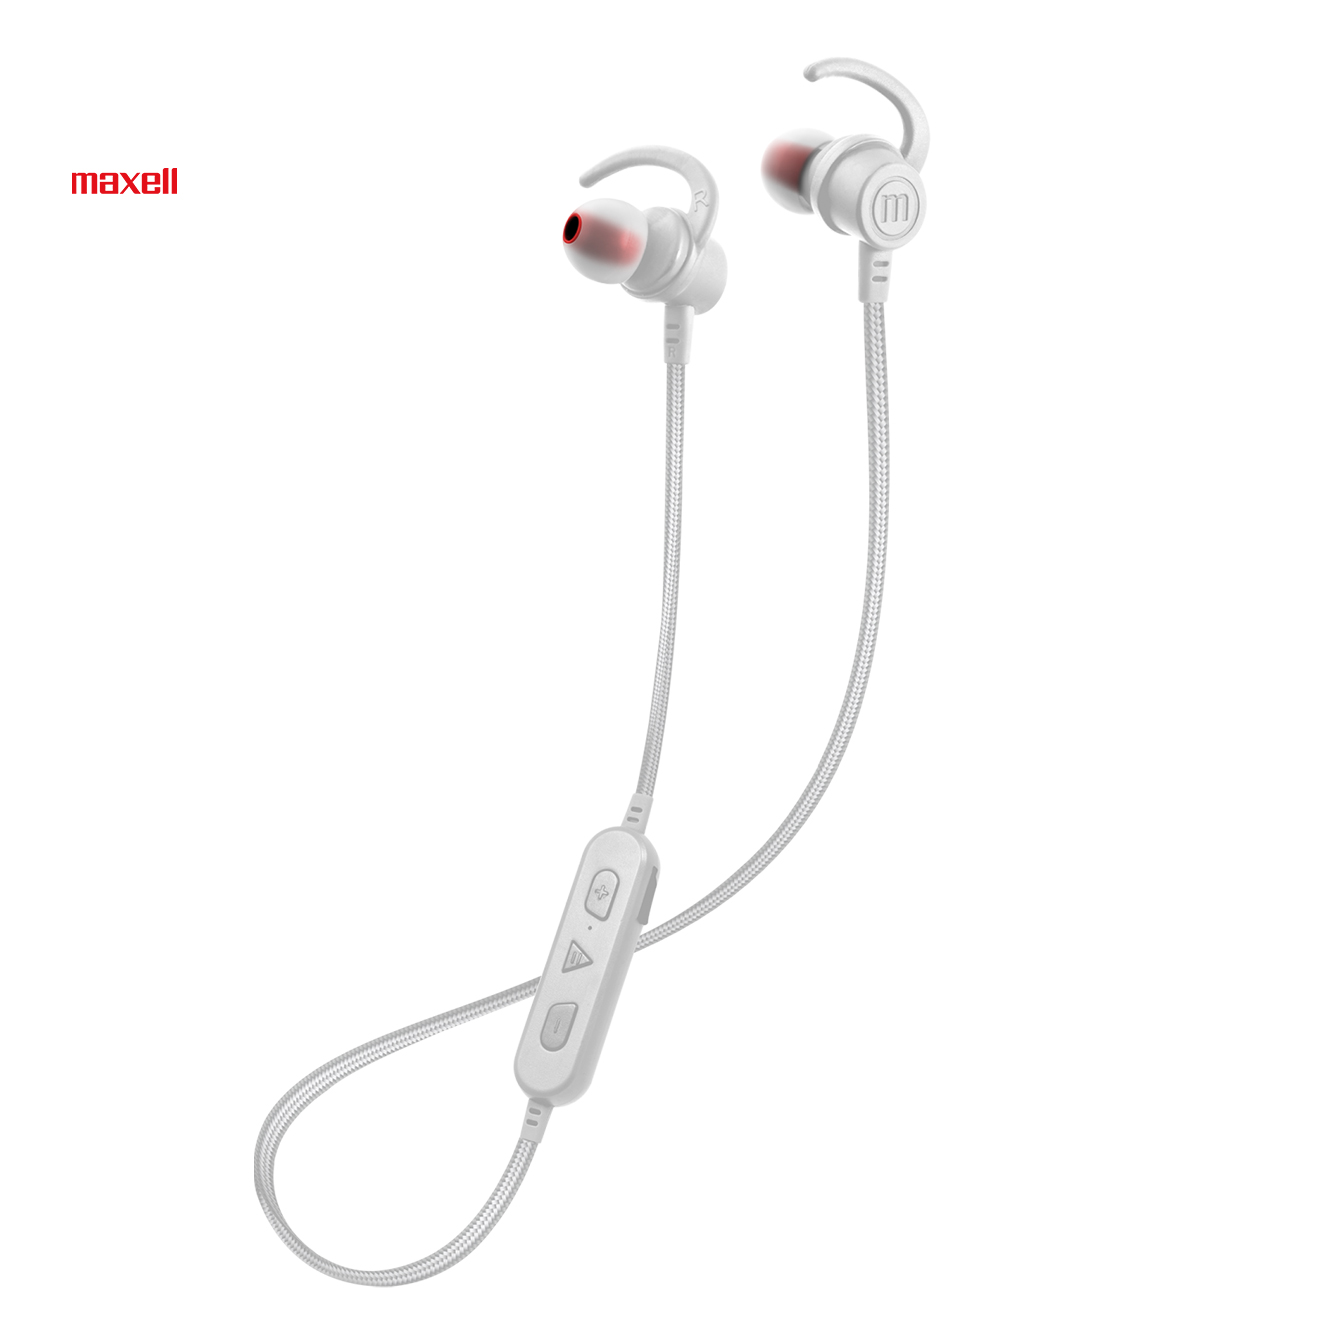 Auriculares Bluetooth 5.0 Blanco A2-1 – Solocell